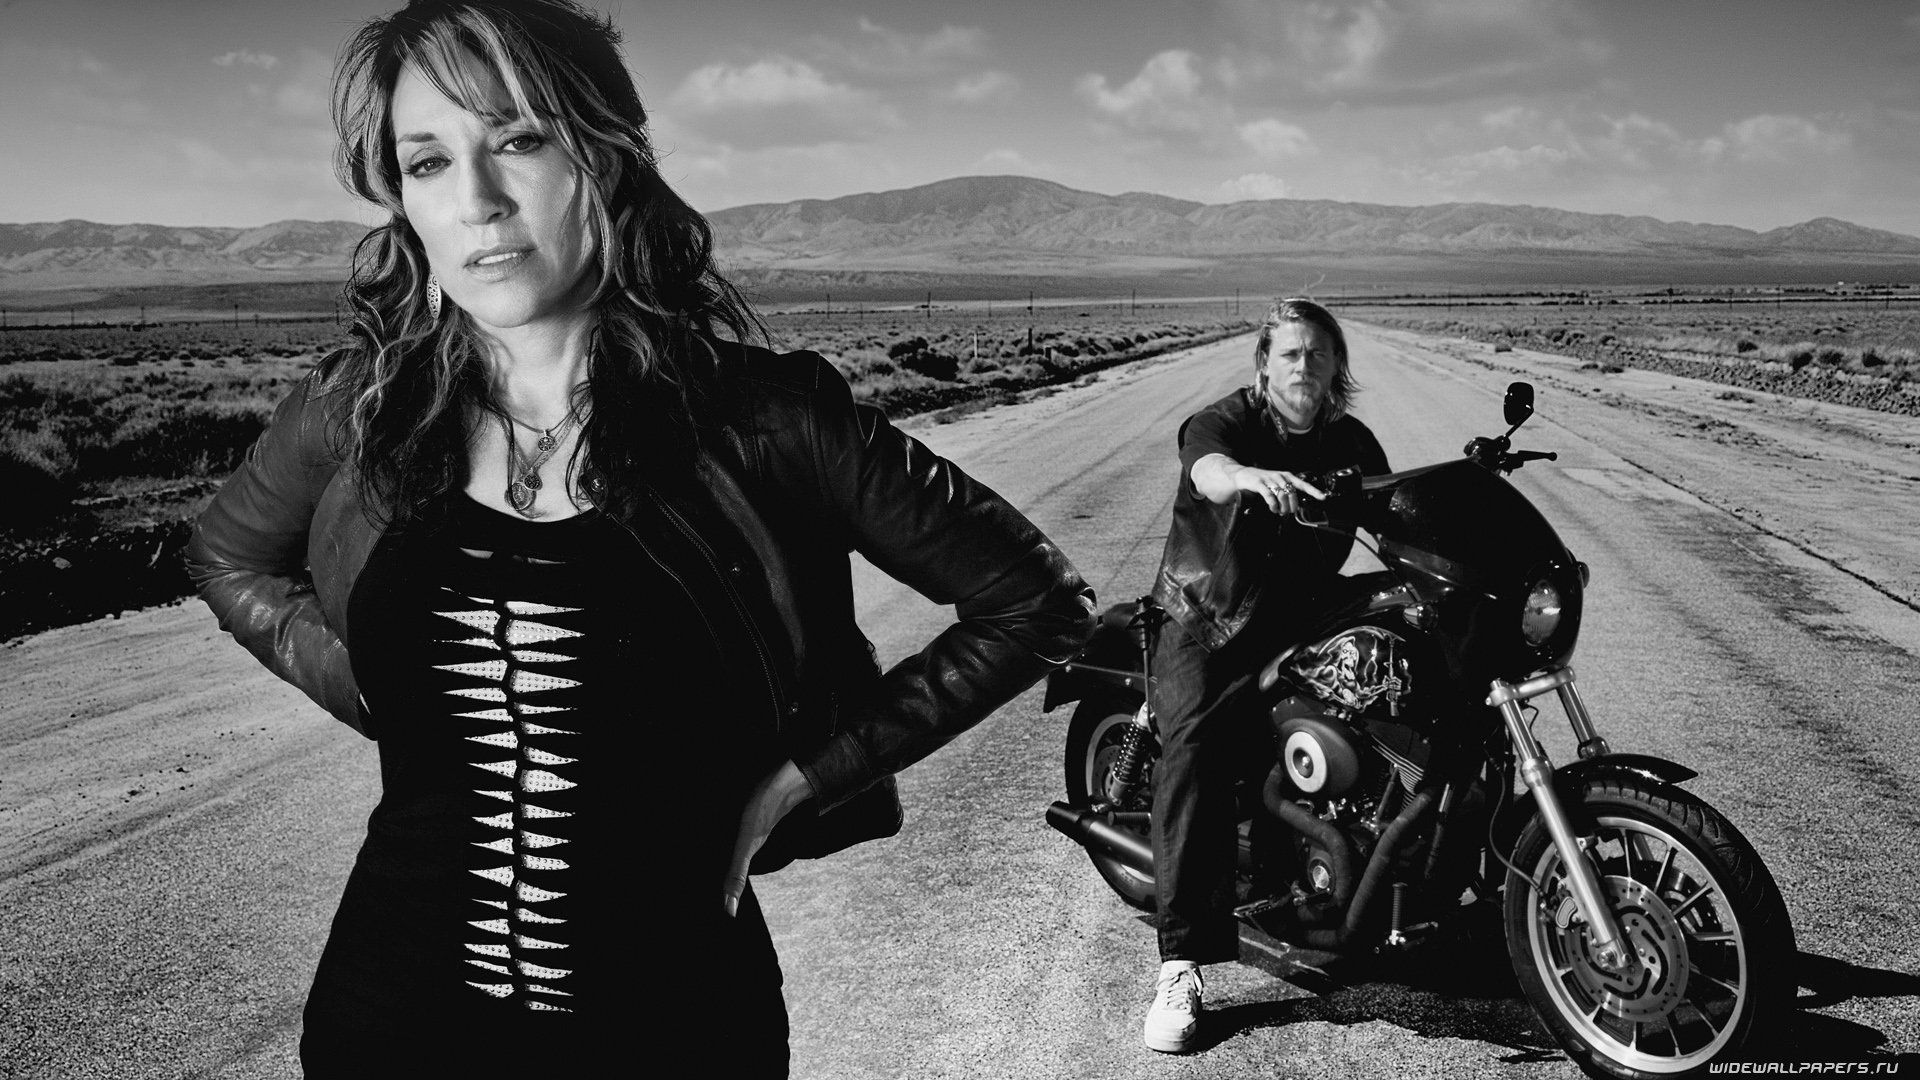 Gemma And Jax - Sons Of Anarchy Wallpaper WallDevil - Best free